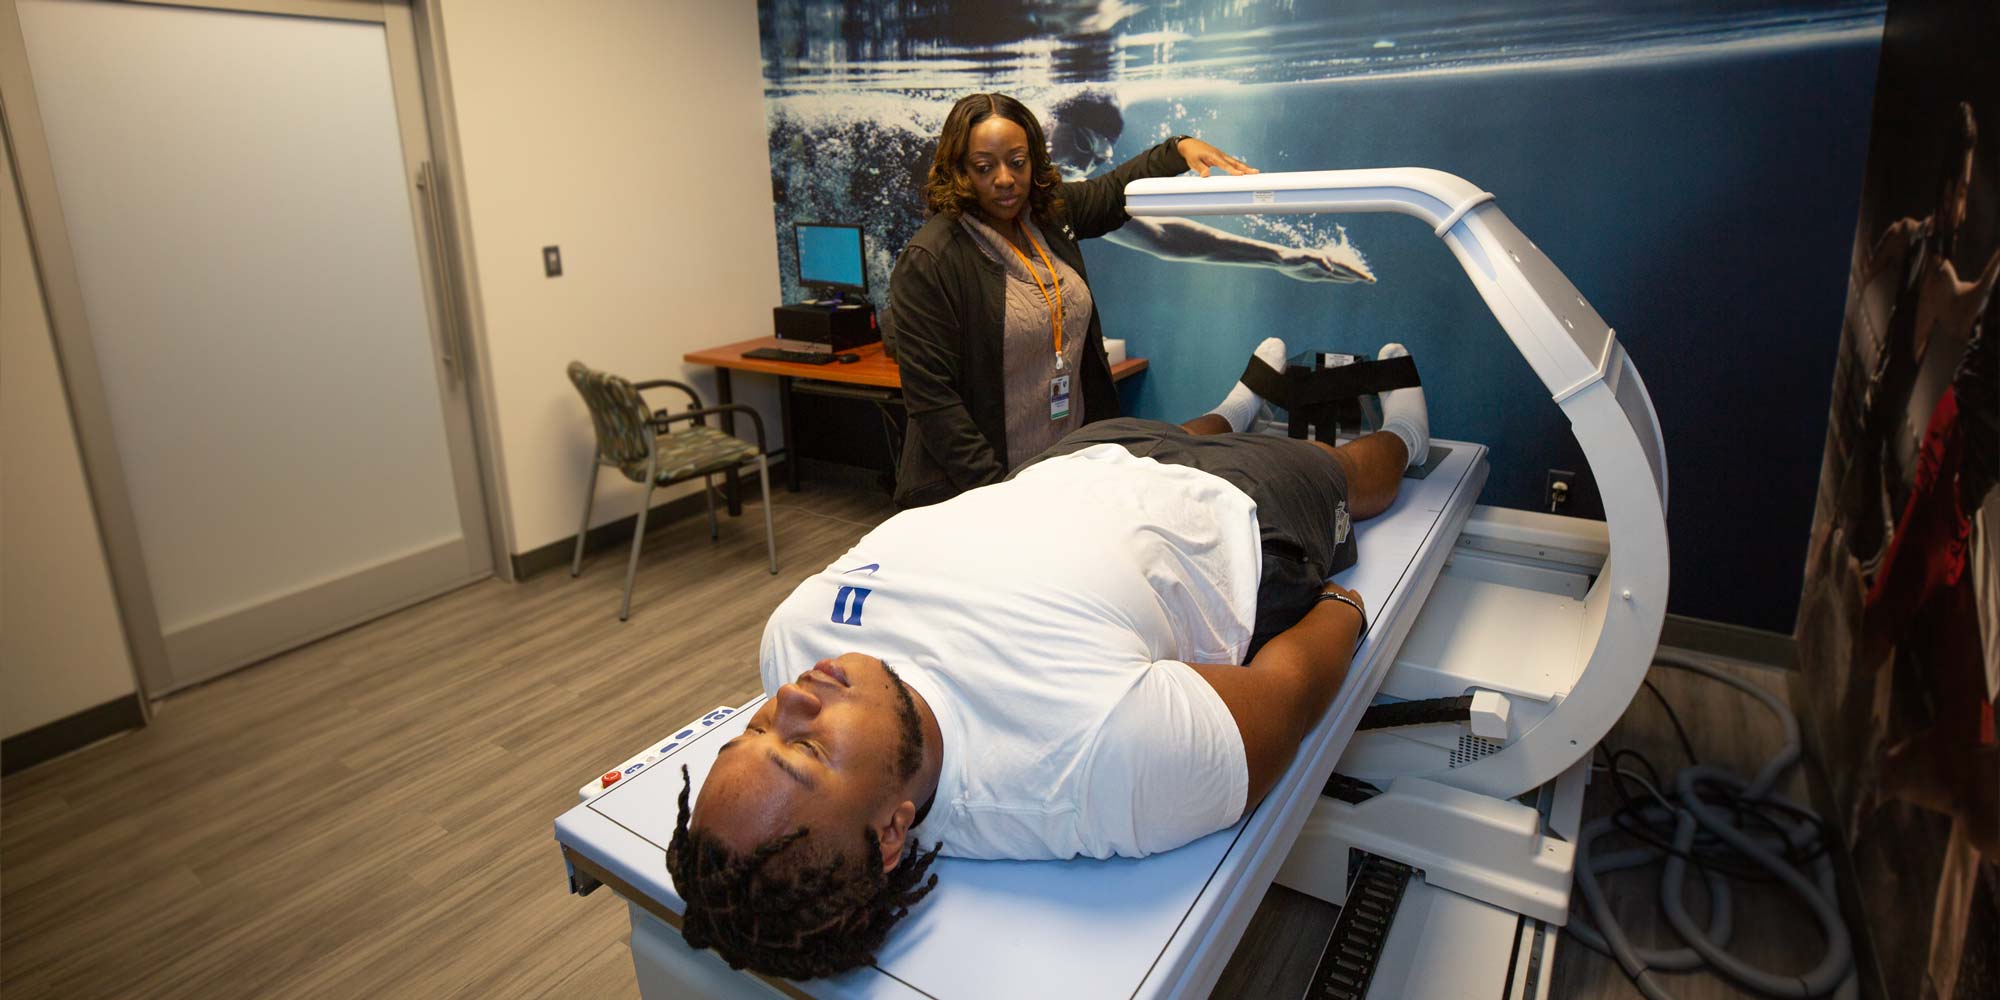 A provider sets up a scan while an athlete lies on a table for the scan